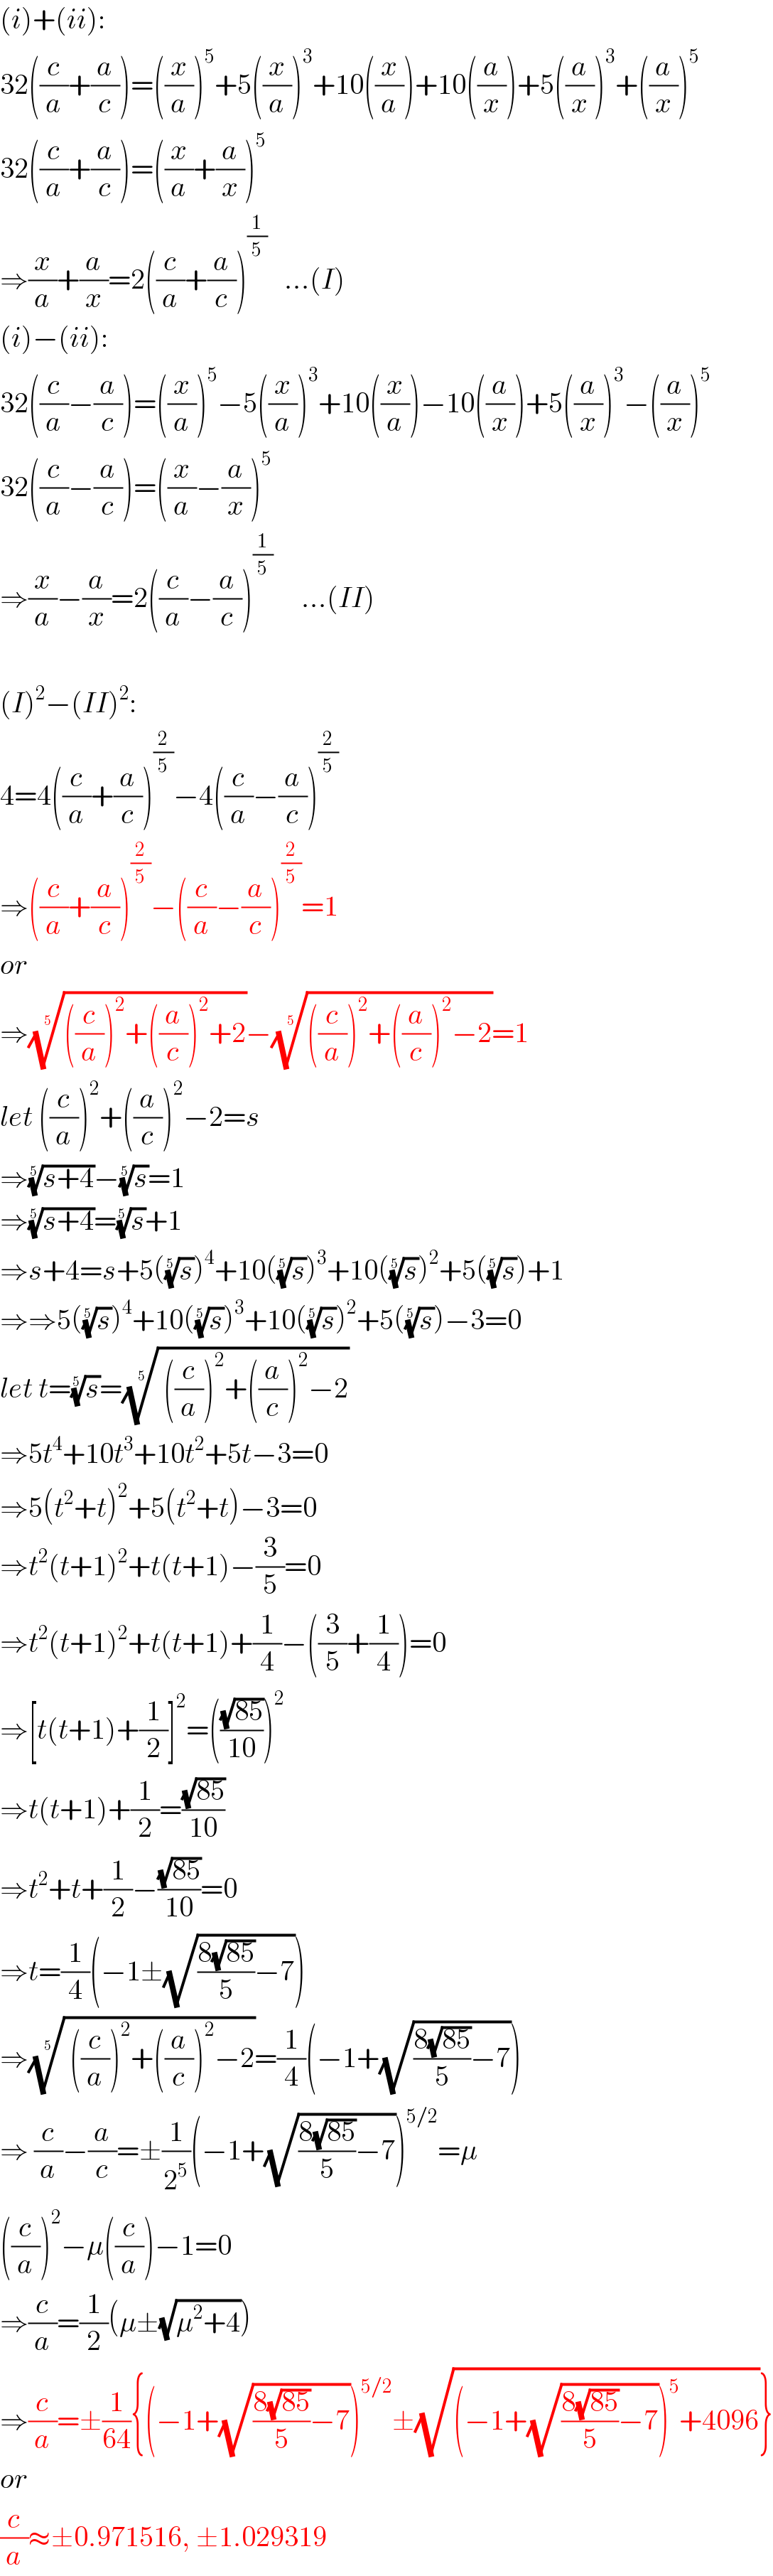 (i)+(ii):  32((c/a)+(a/c))=((x/a))^5 +5((x/a))^3 +10((x/a))+10((a/x))+5((a/x))^3 +((a/x))^5   32((c/a)+(a/c))=((x/a)+(a/x))^5   ⇒(x/a)+(a/x)=2((c/a)+(a/c))^(1/5)    ...(I)  (i)−(ii):  32((c/a)−(a/c))=((x/a))^5 −5((x/a))^3 +10((x/a))−10((a/x))+5((a/x))^3 −((a/x))^5   32((c/a)−(a/c))=((x/a)−(a/x))^5   ⇒(x/a)−(a/x)=2((c/a)−(a/c))^(1/5)      ...(II)    (I)^2 −(II)^2 :  4=4((c/a)+(a/c))^(2/5) −4((c/a)−(a/c))^(2/5)   ⇒((c/a)+(a/c))^(2/5) −((c/a)−(a/c))^(2/5) =1  or  ⇒((((c/a))^2 +((a/c))^2 +2))^(1/5) −((((c/a))^2 +((a/c))^2 −2))^(1/5) =1  let ((c/a))^2 +((a/c))^2 −2=s  ⇒((s+4))^(1/5) −(s)^(1/5) =1  ⇒((s+4))^(1/5) =(s)^(1/5) +1  ⇒s+4=s+5((s)^(1/5) )^4 +10((s)^(1/5) )^3 +10((s)^(1/5) )^2 +5((s)^(1/5) )+1  ⇒⇒5((s)^(1/5) )^4 +10((s)^(1/5) )^3 +10((s)^(1/5) )^2 +5((s)^(1/5) )−3=0  let t=(s)^(1/5) =(( ((c/a))^2 +((a/c))^2 −2))^(1/5)   ⇒5t^4 +10t^3 +10t^2 +5t−3=0  ⇒5(t^2 +t)^2 +5(t^2 +t)−3=0  ⇒t^2 (t+1)^2 +t(t+1)−(3/5)=0  ⇒t^2 (t+1)^2 +t(t+1)+(1/4)−((3/5)+(1/4))=0  ⇒[t(t+1)+(1/2)]^2 =(((√(85))/(10)))^2   ⇒t(t+1)+(1/2)=((√(85))/(10))  ⇒t^2 +t+(1/2)−((√(85))/(10))=0  ⇒t=(1/4)(−1±(√(((8(√(85)))/5)−7)))  ⇒(( ((c/a))^2 +((a/c))^2 −2))^(1/5) =(1/4)(−1+(√(((8(√(85)))/5)−7)))  ⇒ (c/a)−(a/c)=±(1/2^5 )(−1+(√(((8(√(85)))/5)−7)))^(5/2) =μ  ((c/a))^2 −μ((c/a))−1=0  ⇒(c/a)=(1/2)(μ±(√(μ^2 +4)))  ⇒(c/a)=±(1/(64)){(−1+(√(((8(√(85)))/5)−7)))^(5/2) ±(√((−1+(√(((8(√(85)))/5)−7)))^5 +4096))}  or  (c/a)≈±0.971516, ±1.029319  